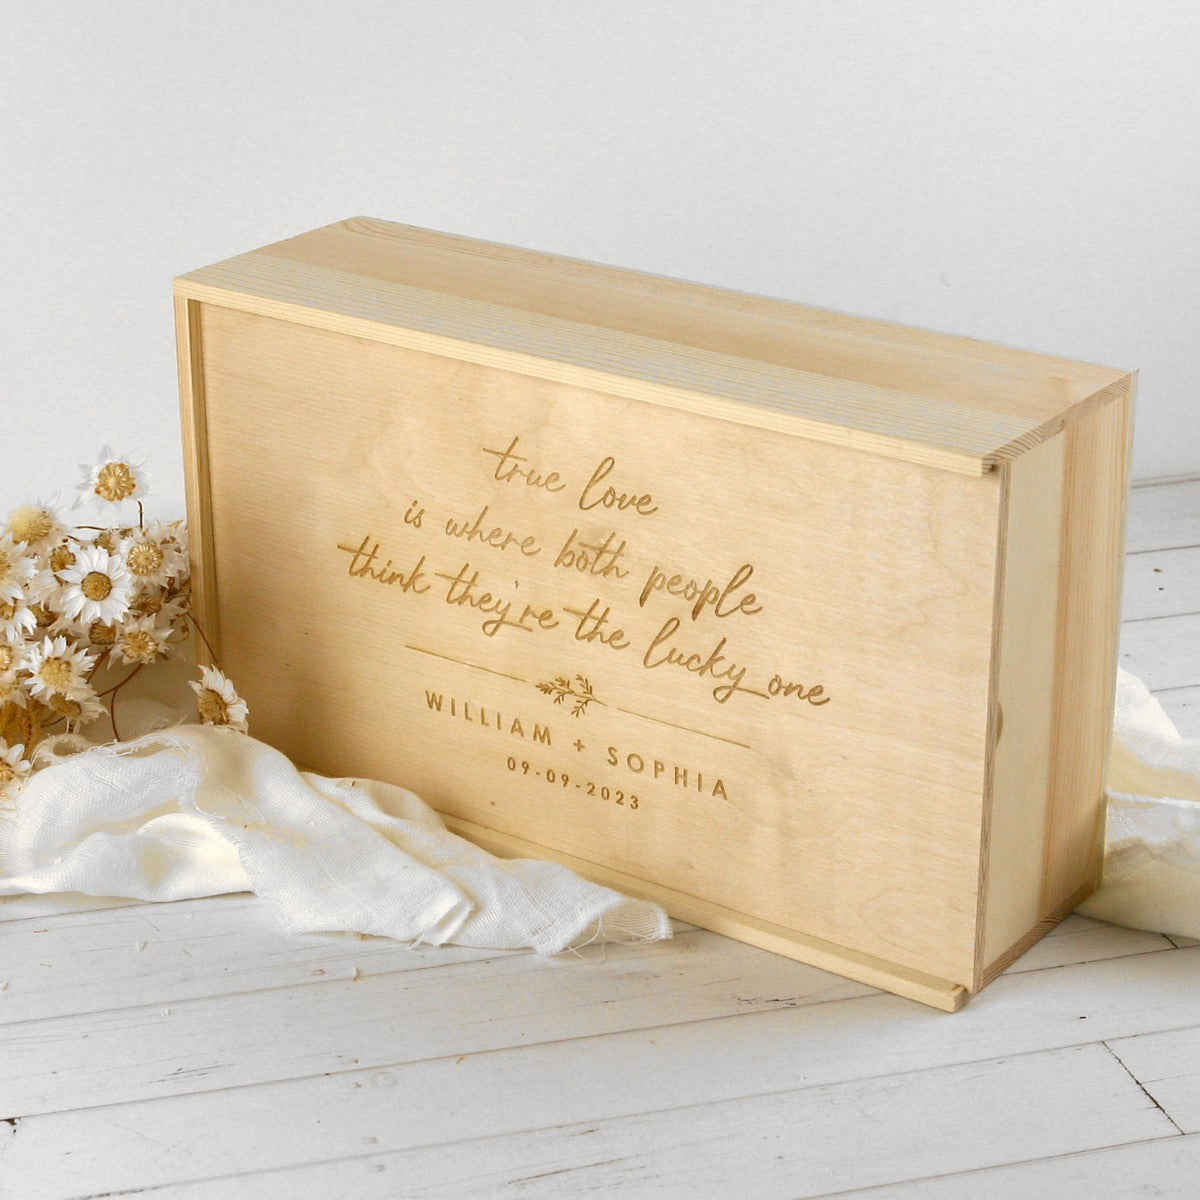 Shop Personalised Wooden Gift Box Online India – Nutcase